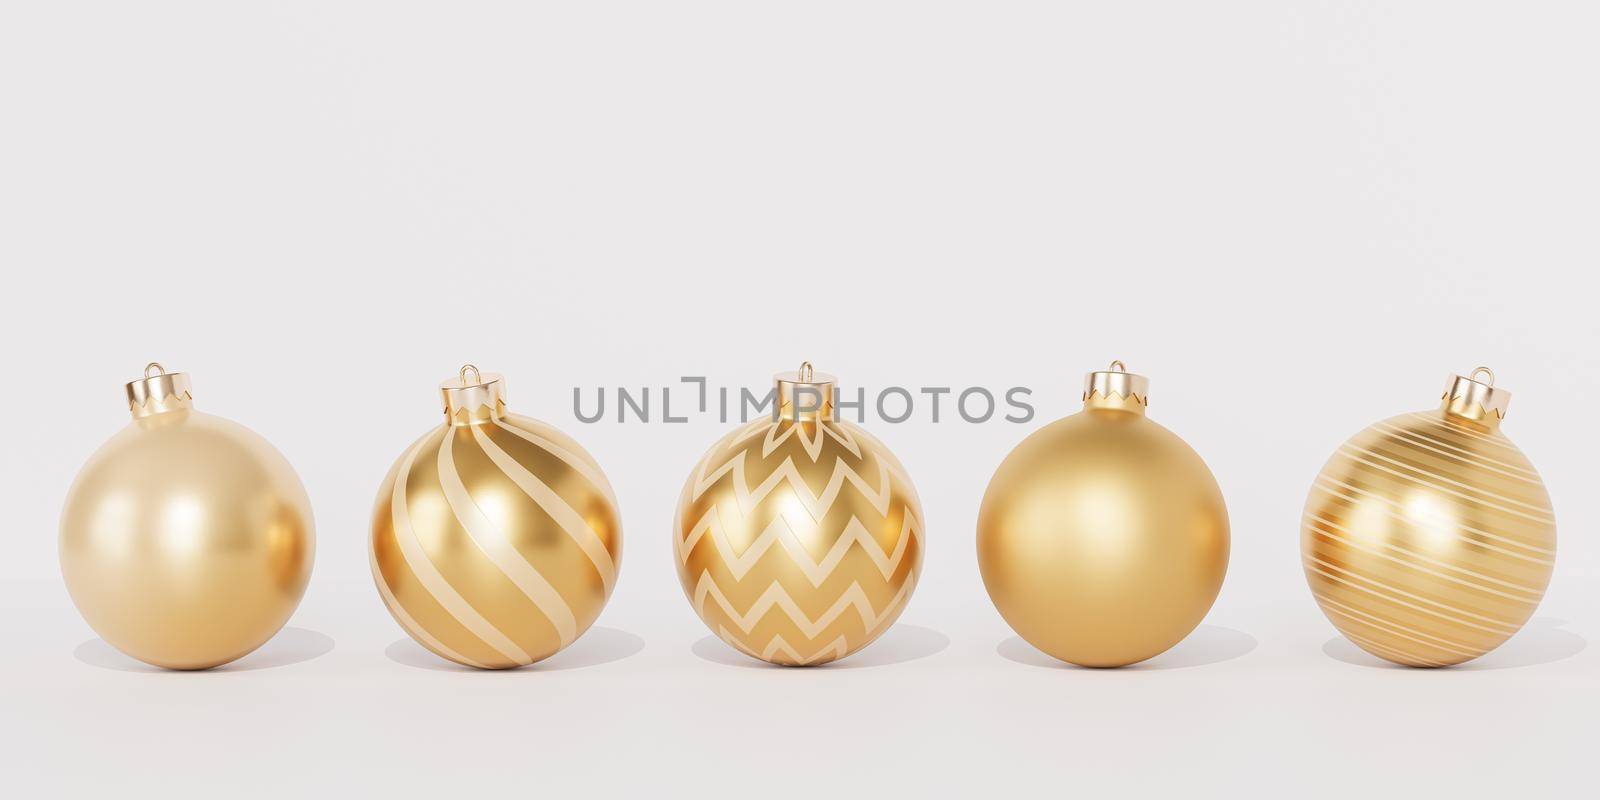 Christmas or New Year holidays banner background with golden baubles or ornaments, 3d render by Frostroomhead